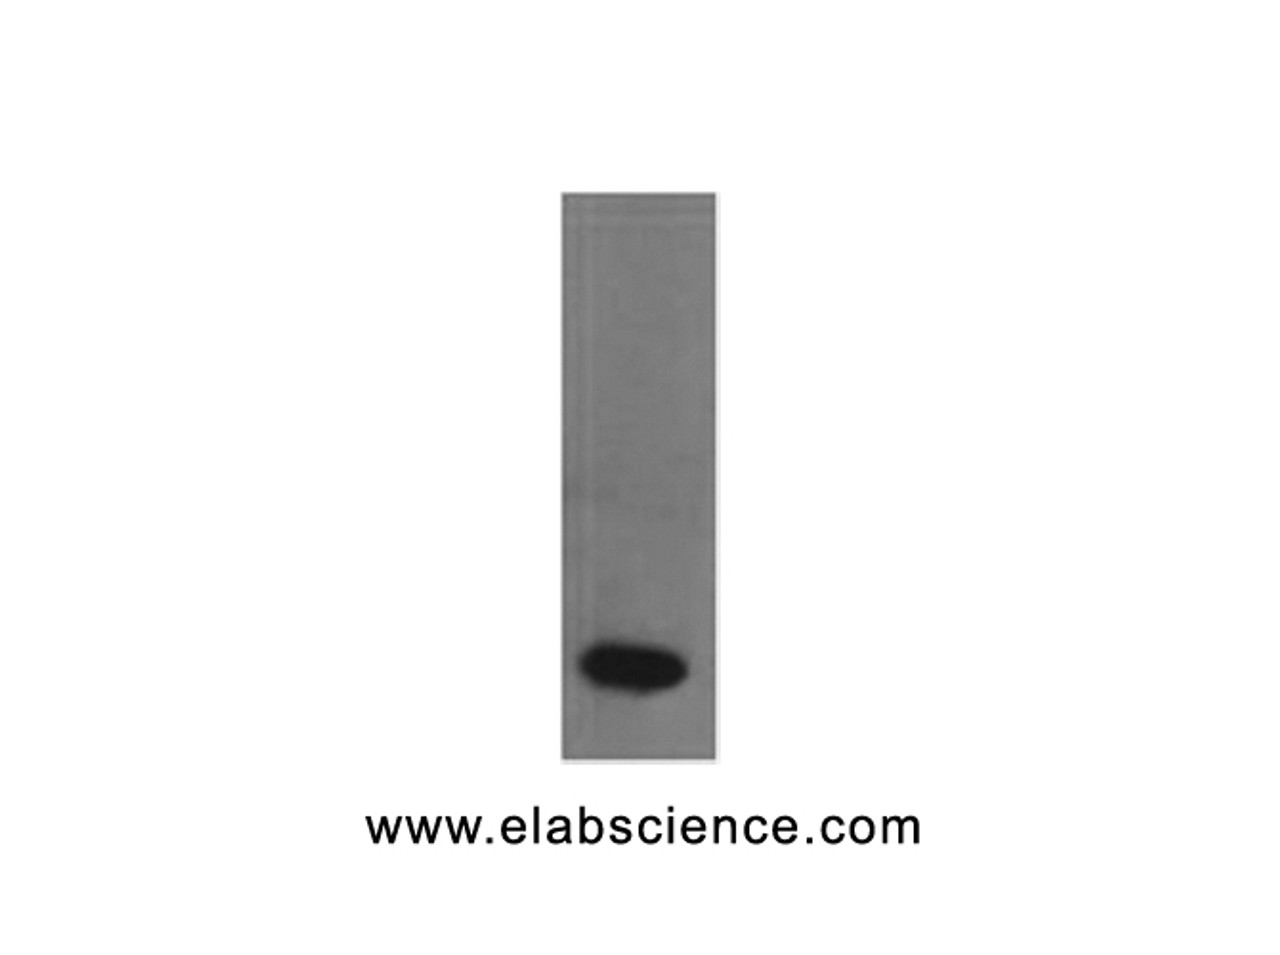 Western Blot analysis of Recombinant human TNF α protein using TNF alpha Monoclonal Antibody at dilution of 1:2000.